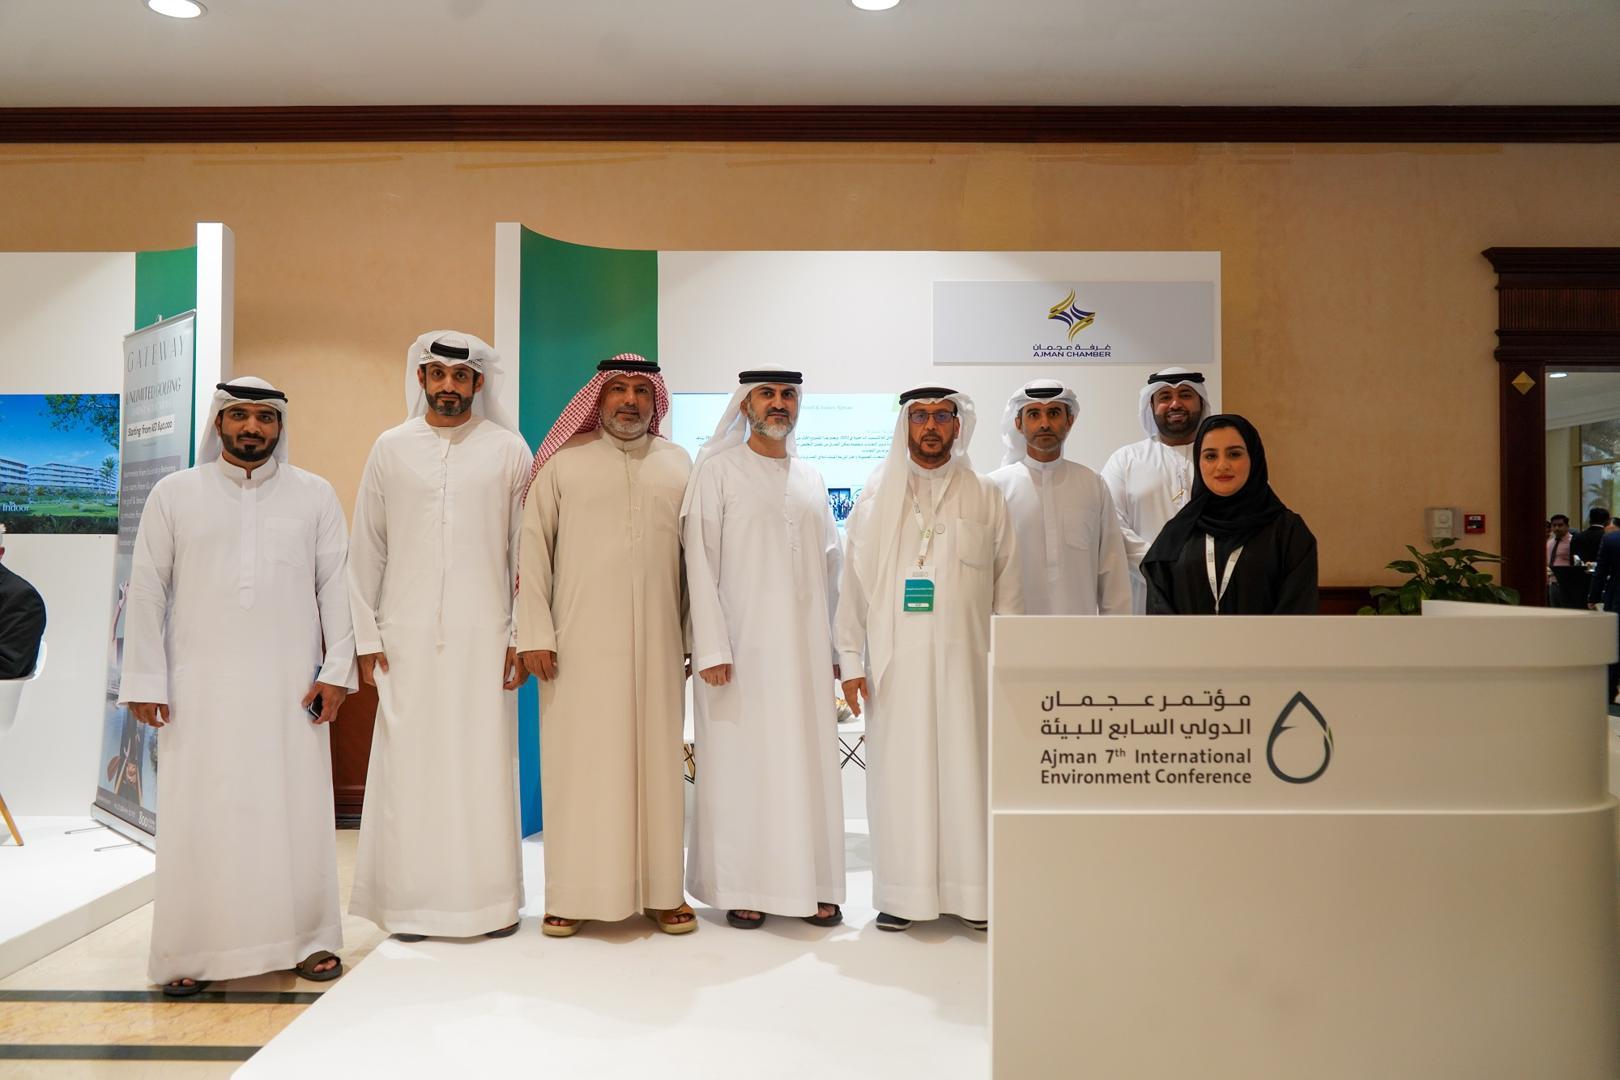 Ajman Chamber participates in the events of the "Ajman 7ᵗʰ International Environment Conference"